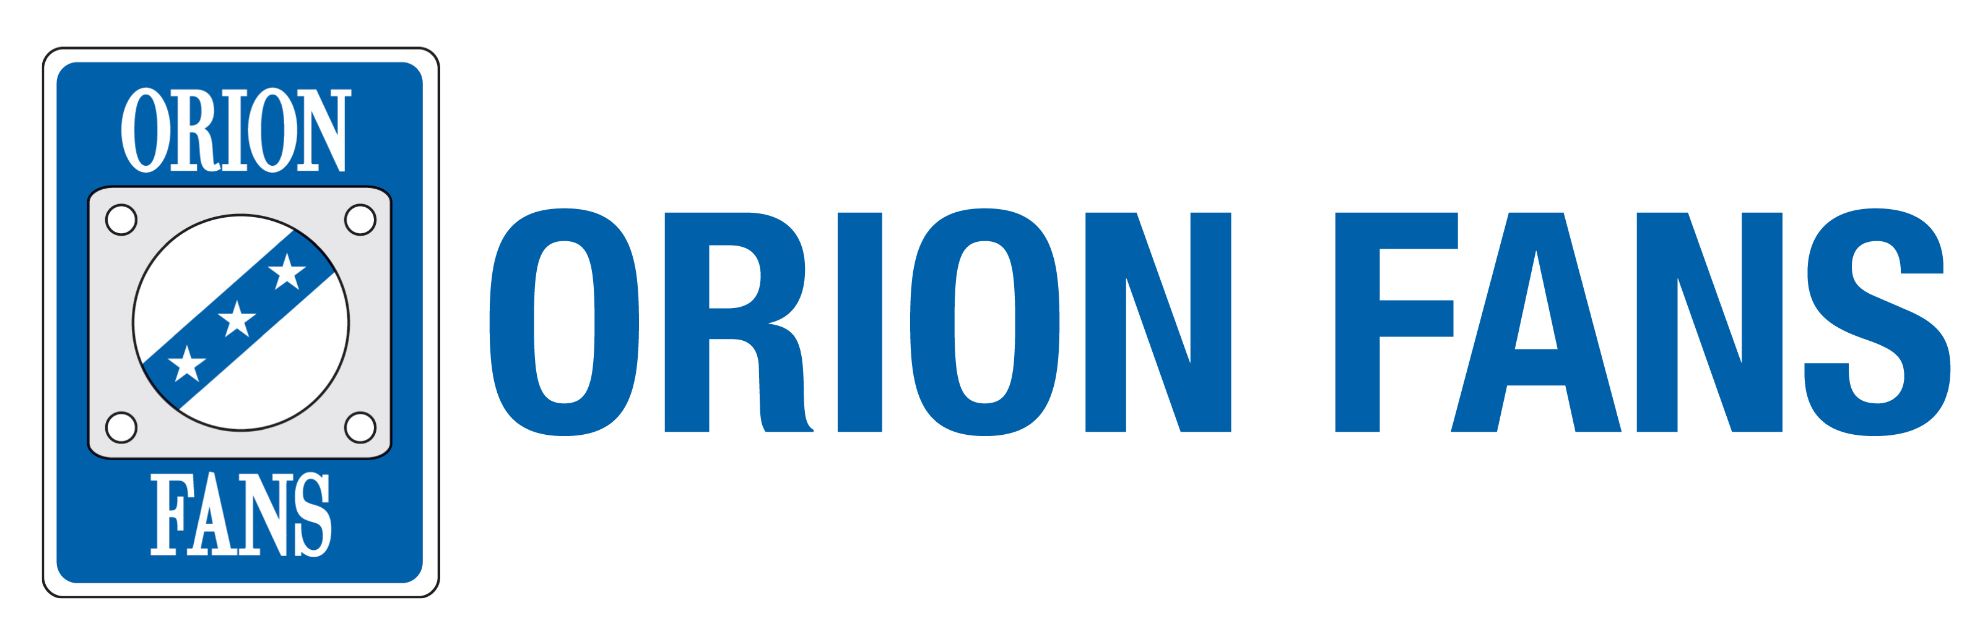 Show products manufactured by Orion Fans